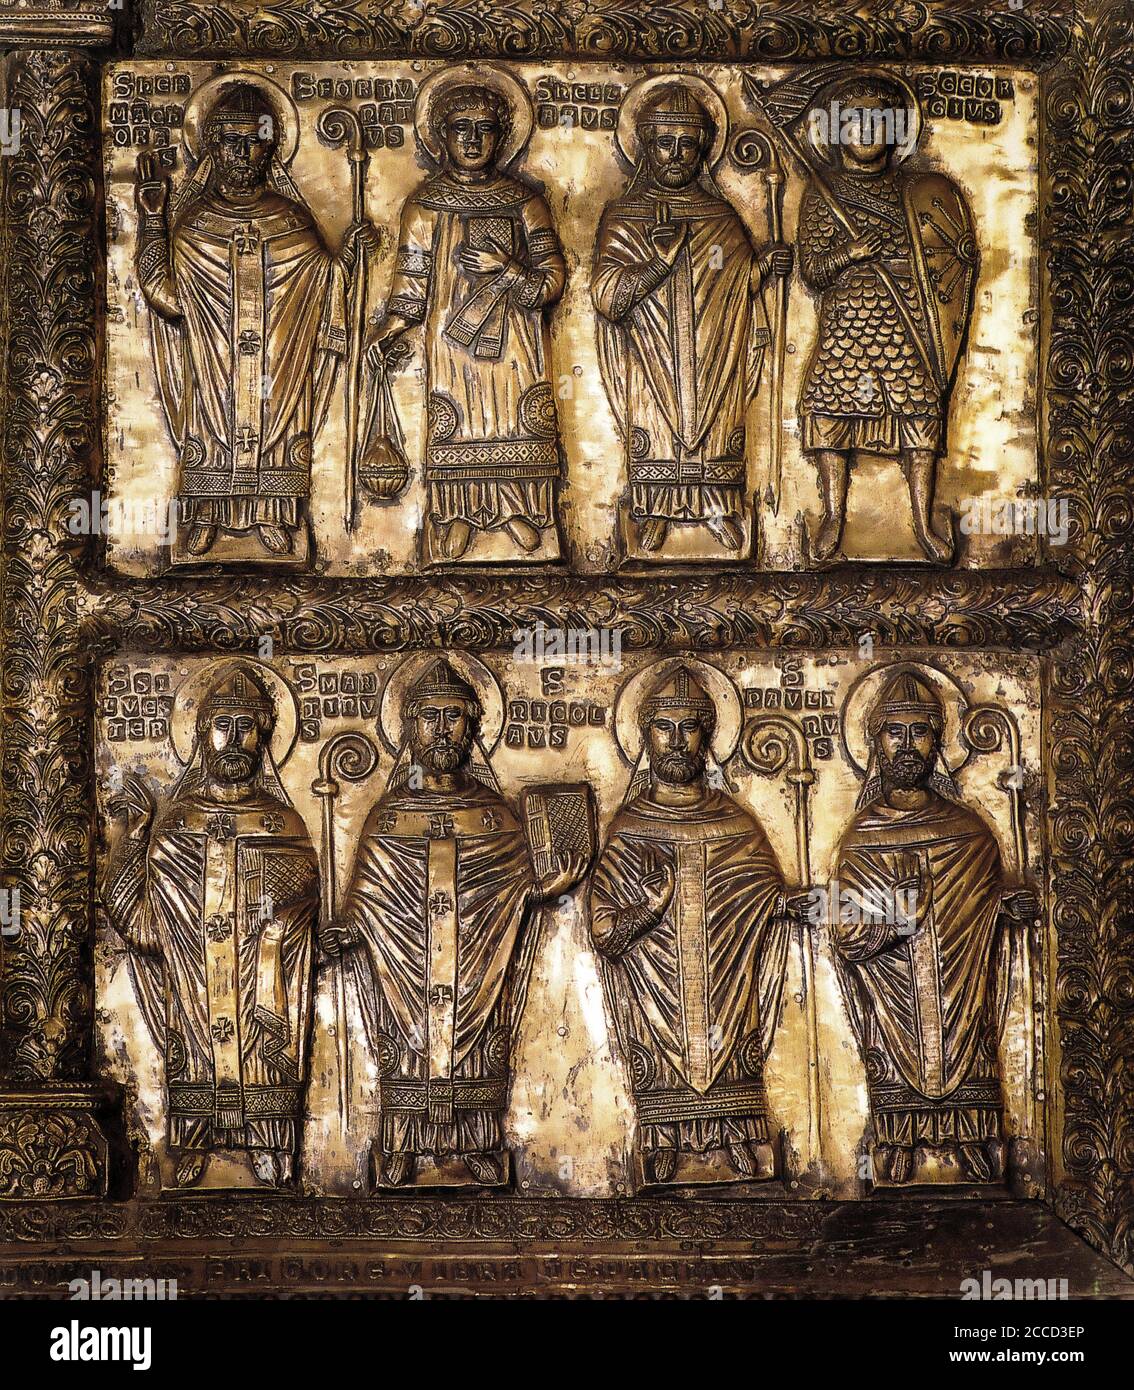 Italy Friuli Cividale del Friuli Cathedral - Altarpiece - Right Side Detail - 12th century gilded silver sheet with representation of saints with punched names Stock Photo